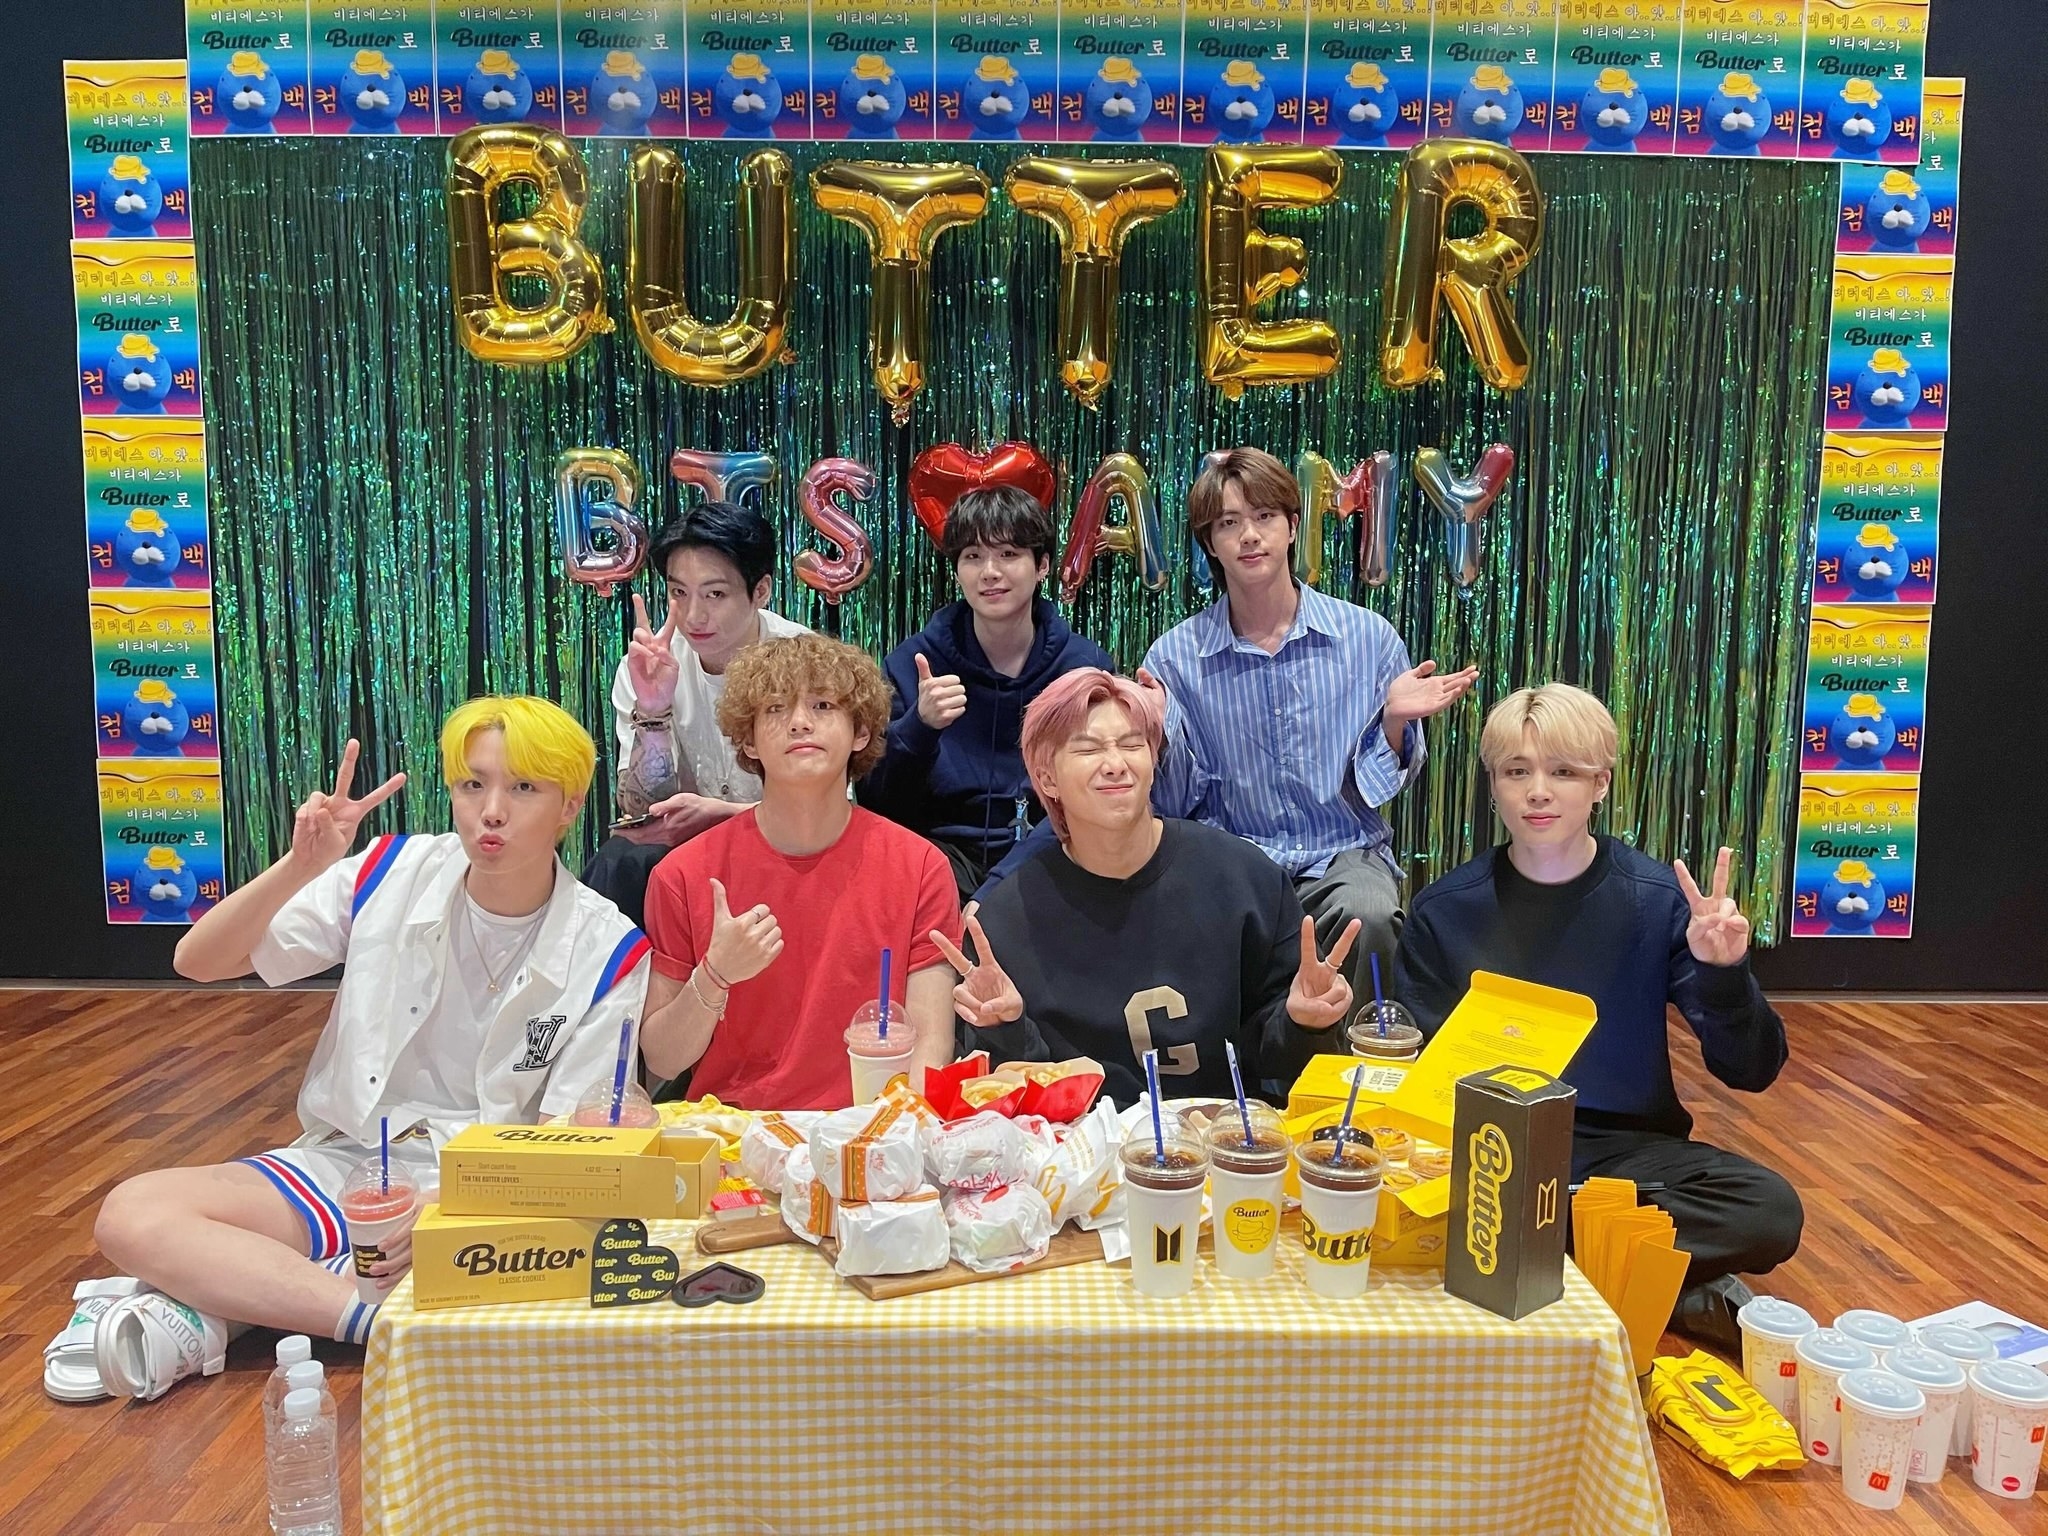 Interview Bts On Butter And Making Music With A Legacy